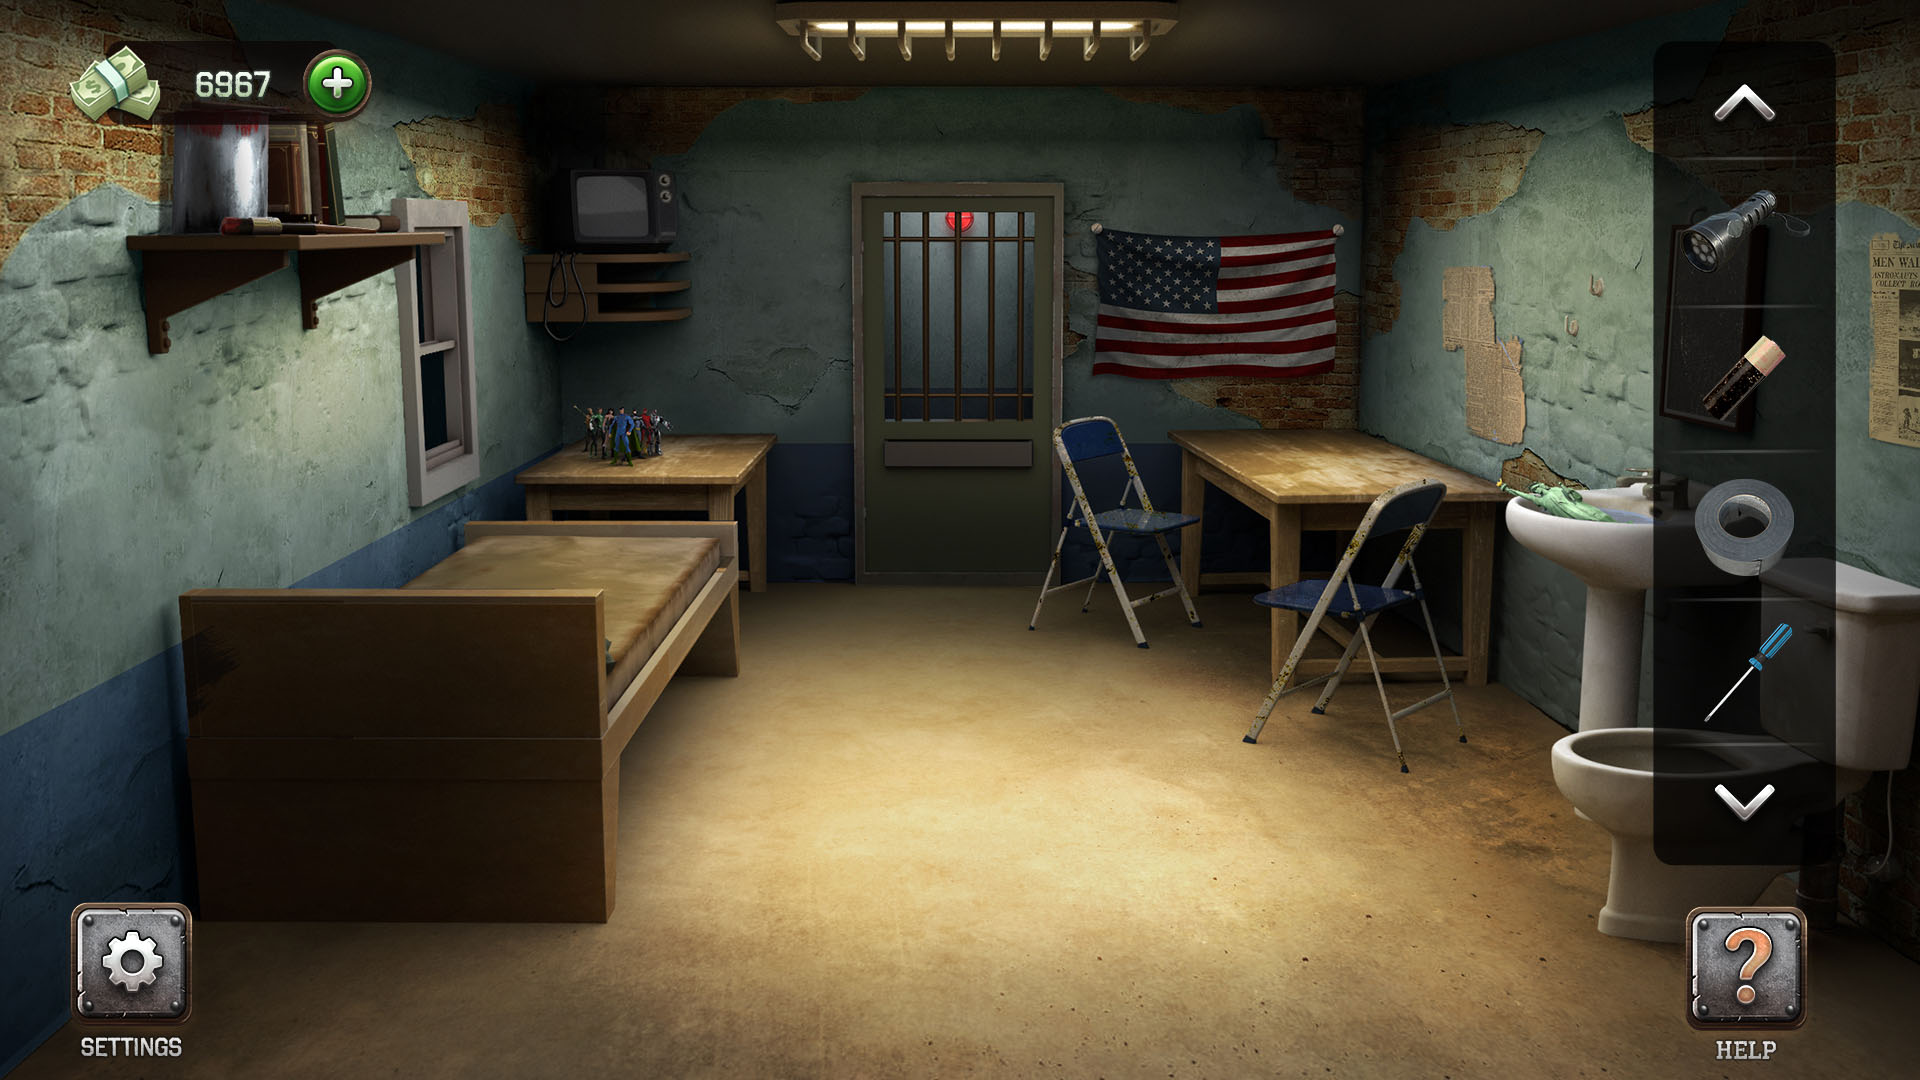 Download 100 Doors - Escape from Prison Android free game.